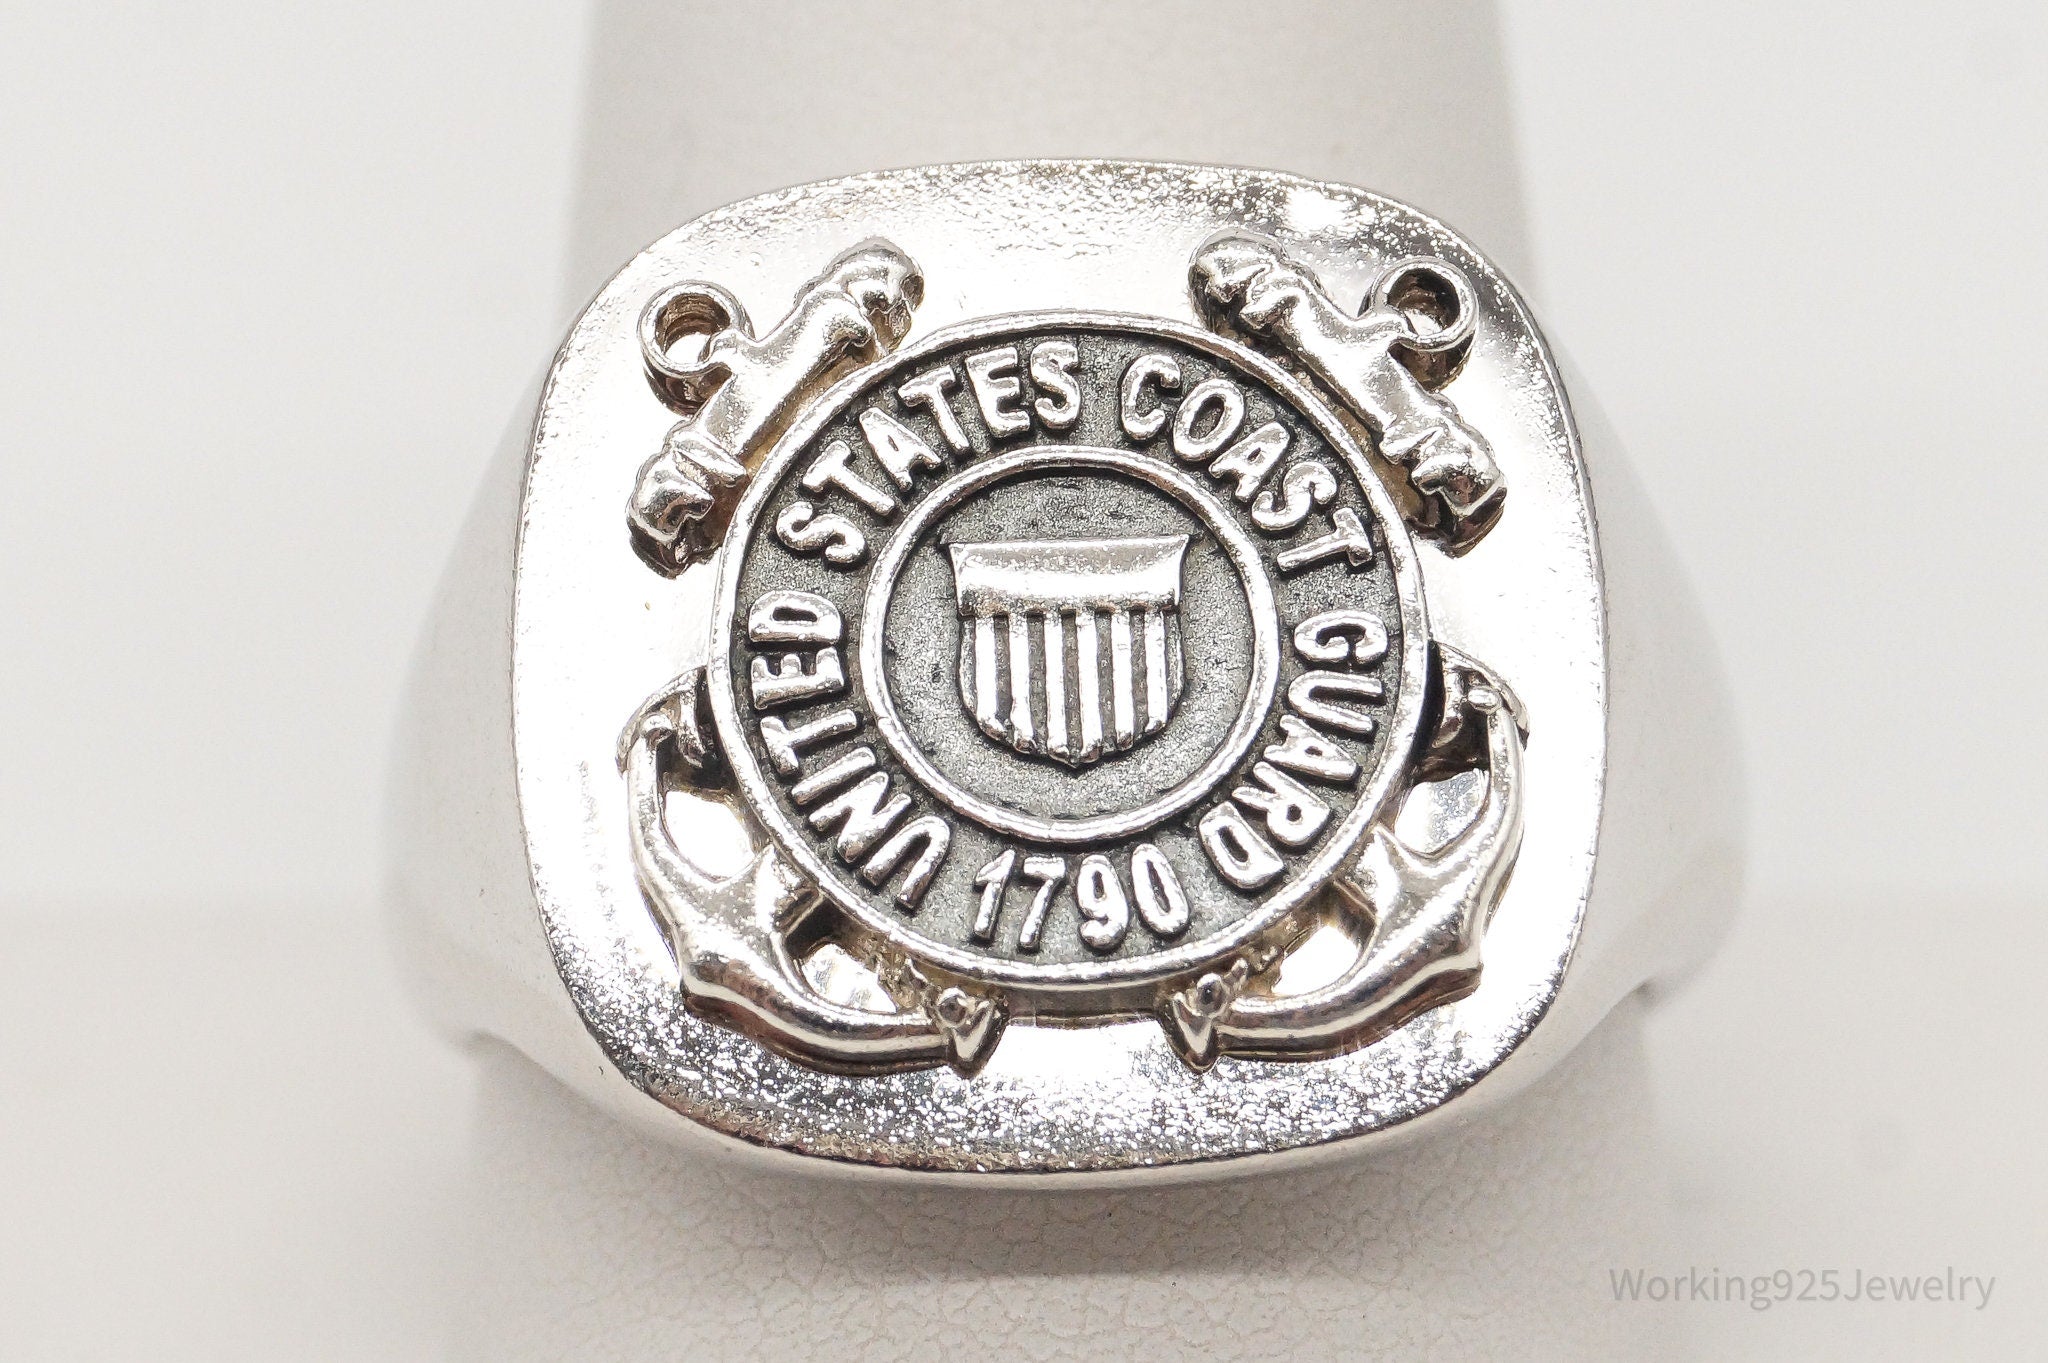 Vintage United States Coast Guard Sterling Silver Ring Size 11